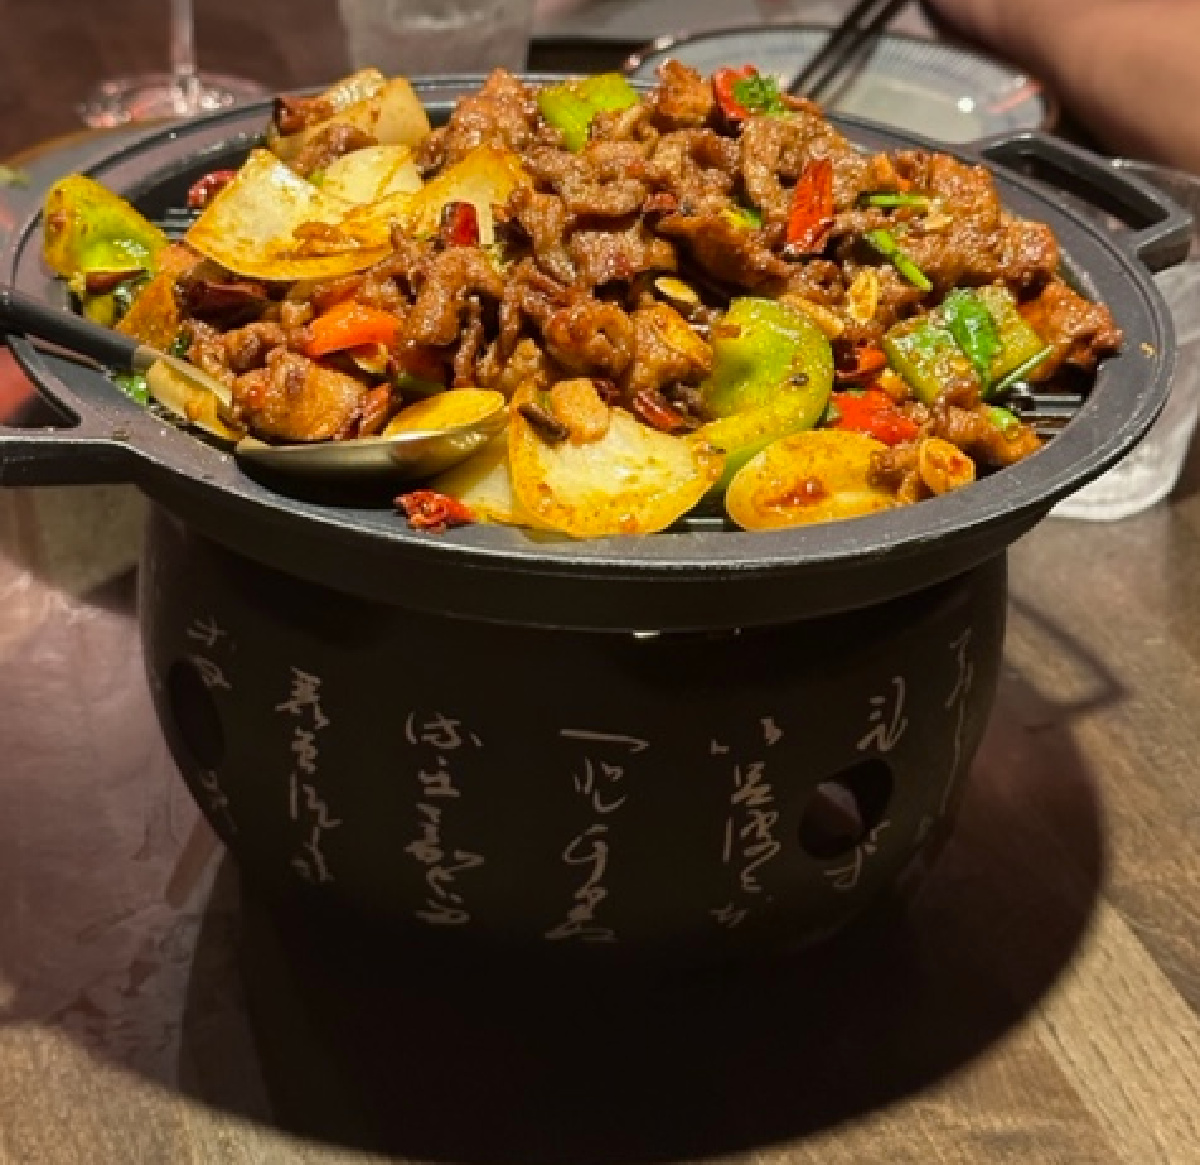 Beef, peppers, onion, and other items in a dry hotpot.